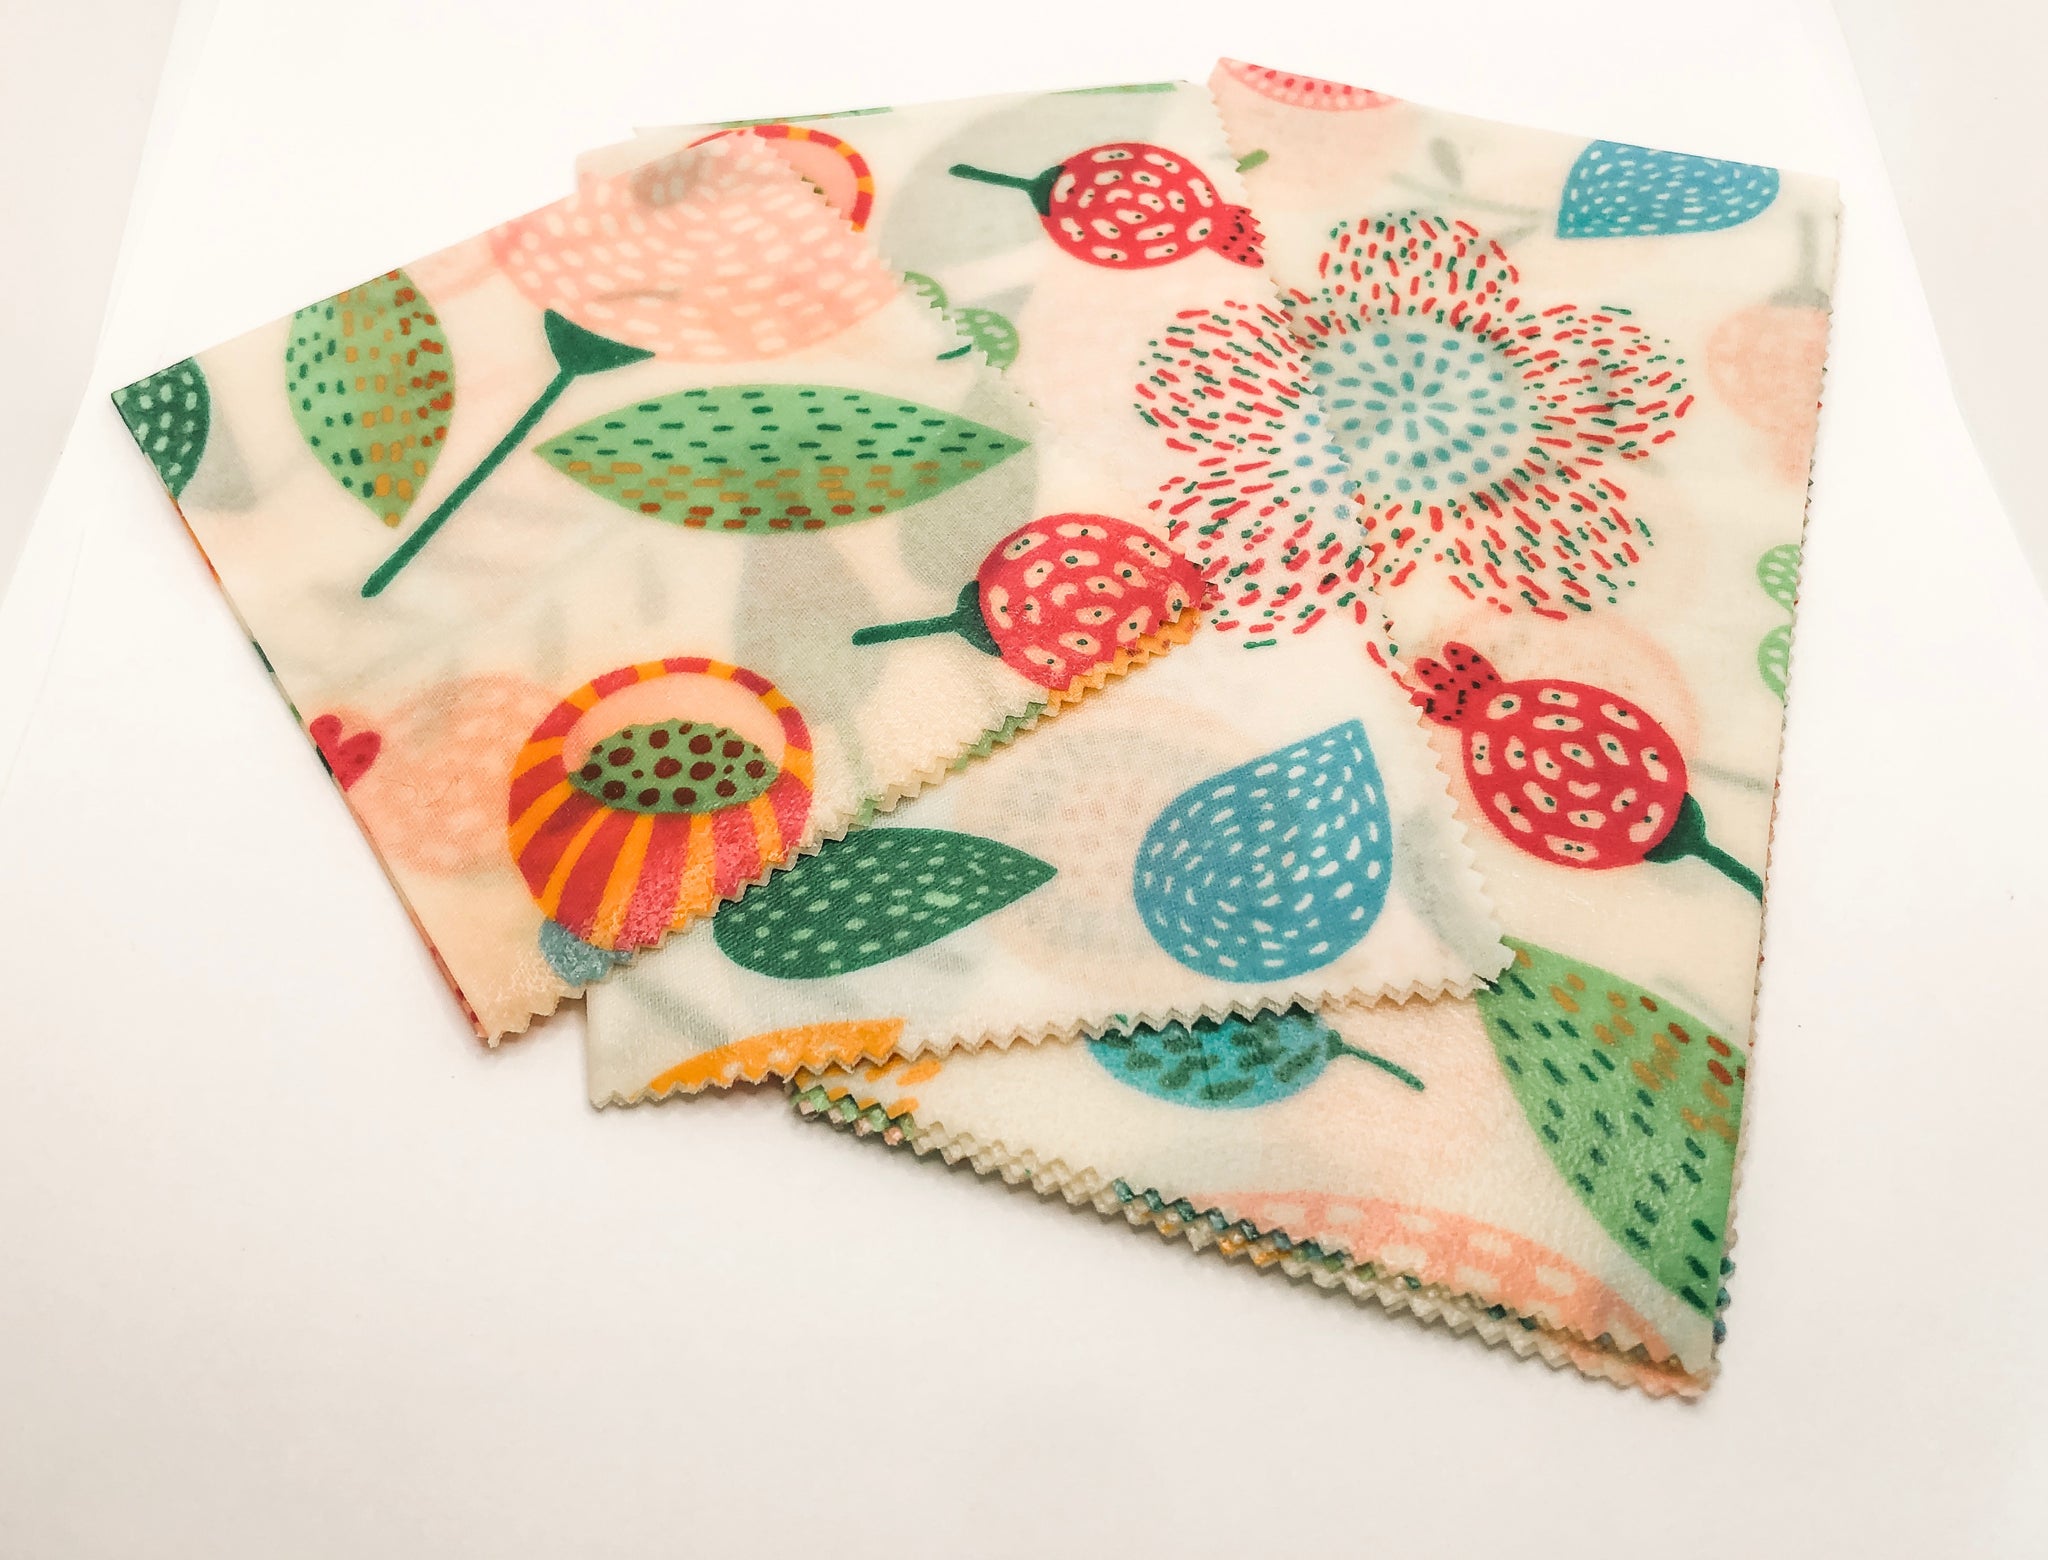 Organic Beeswax Food Wrap Covers - Set of 3 - Blossom